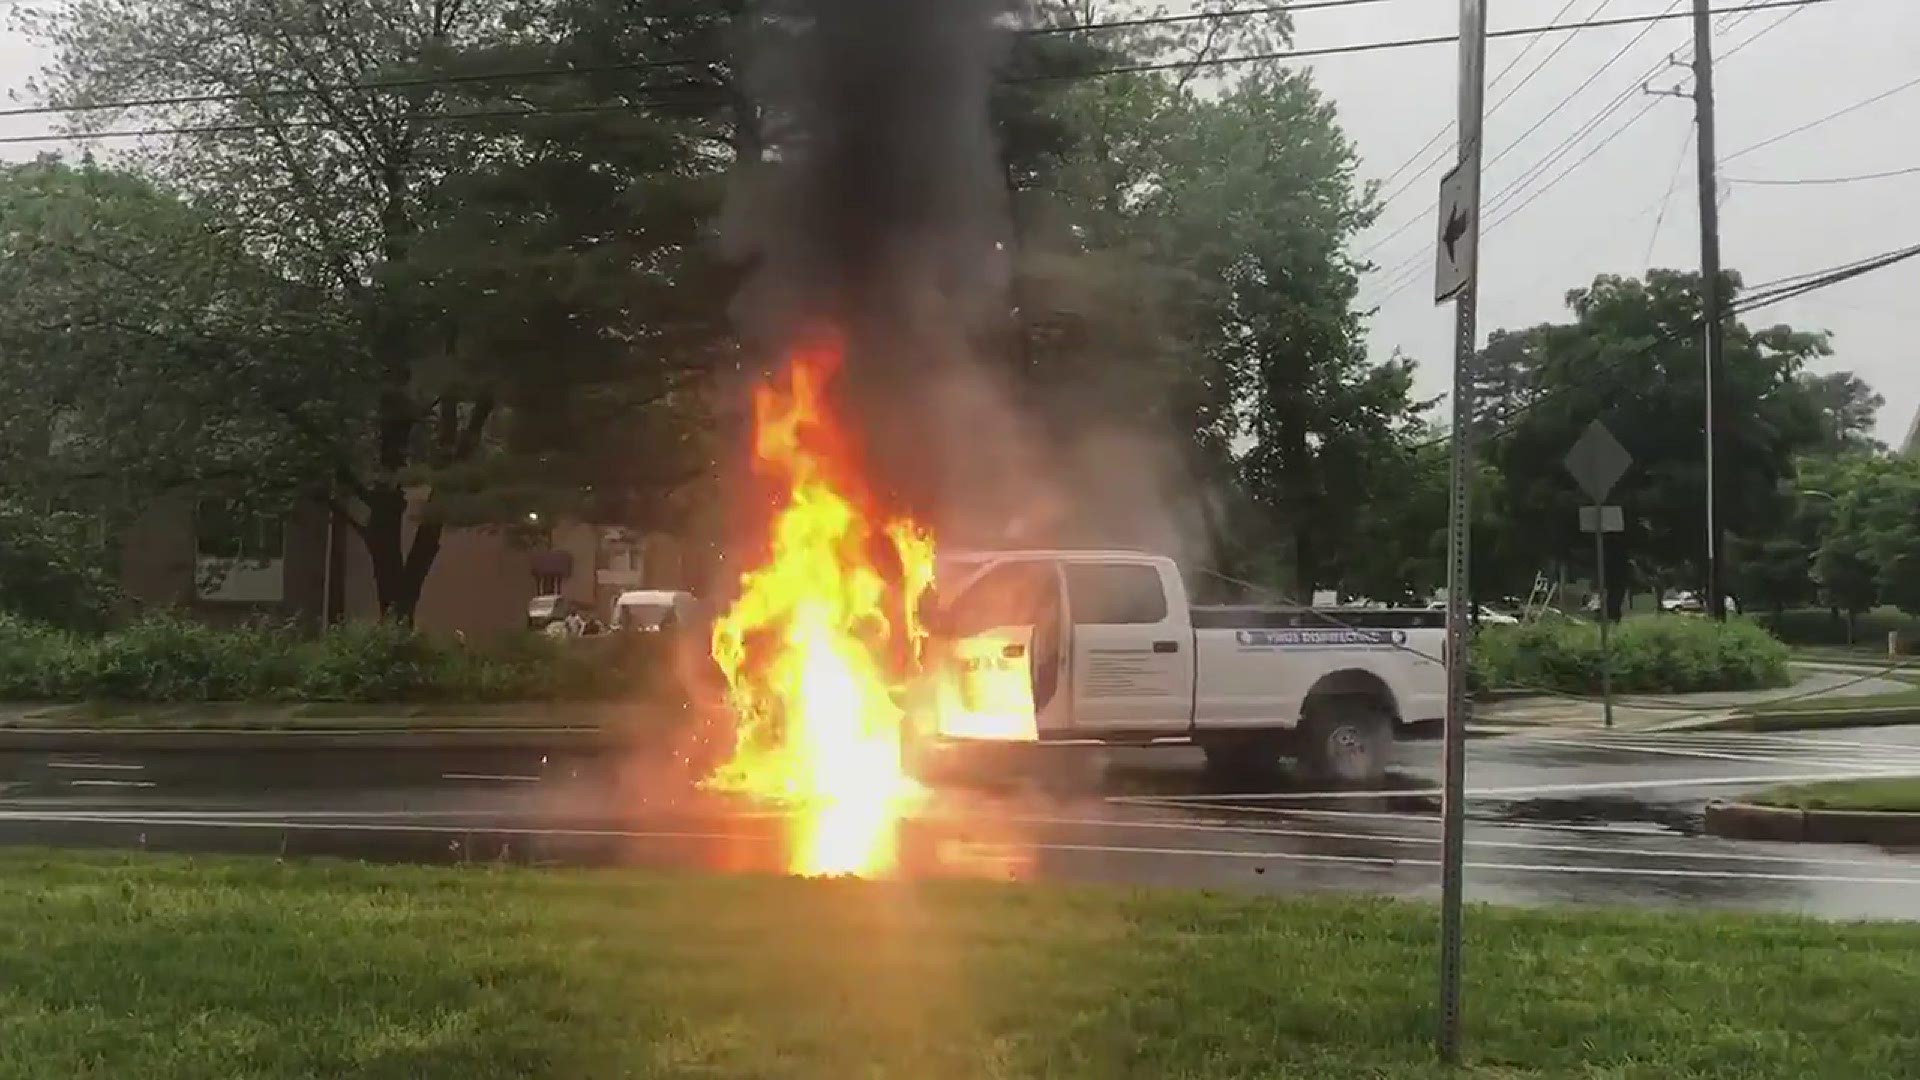 Downed live wires caused a truck to engulf in flames along West Diamond Avenue and Muddy Branch Road in Gaithersburg.